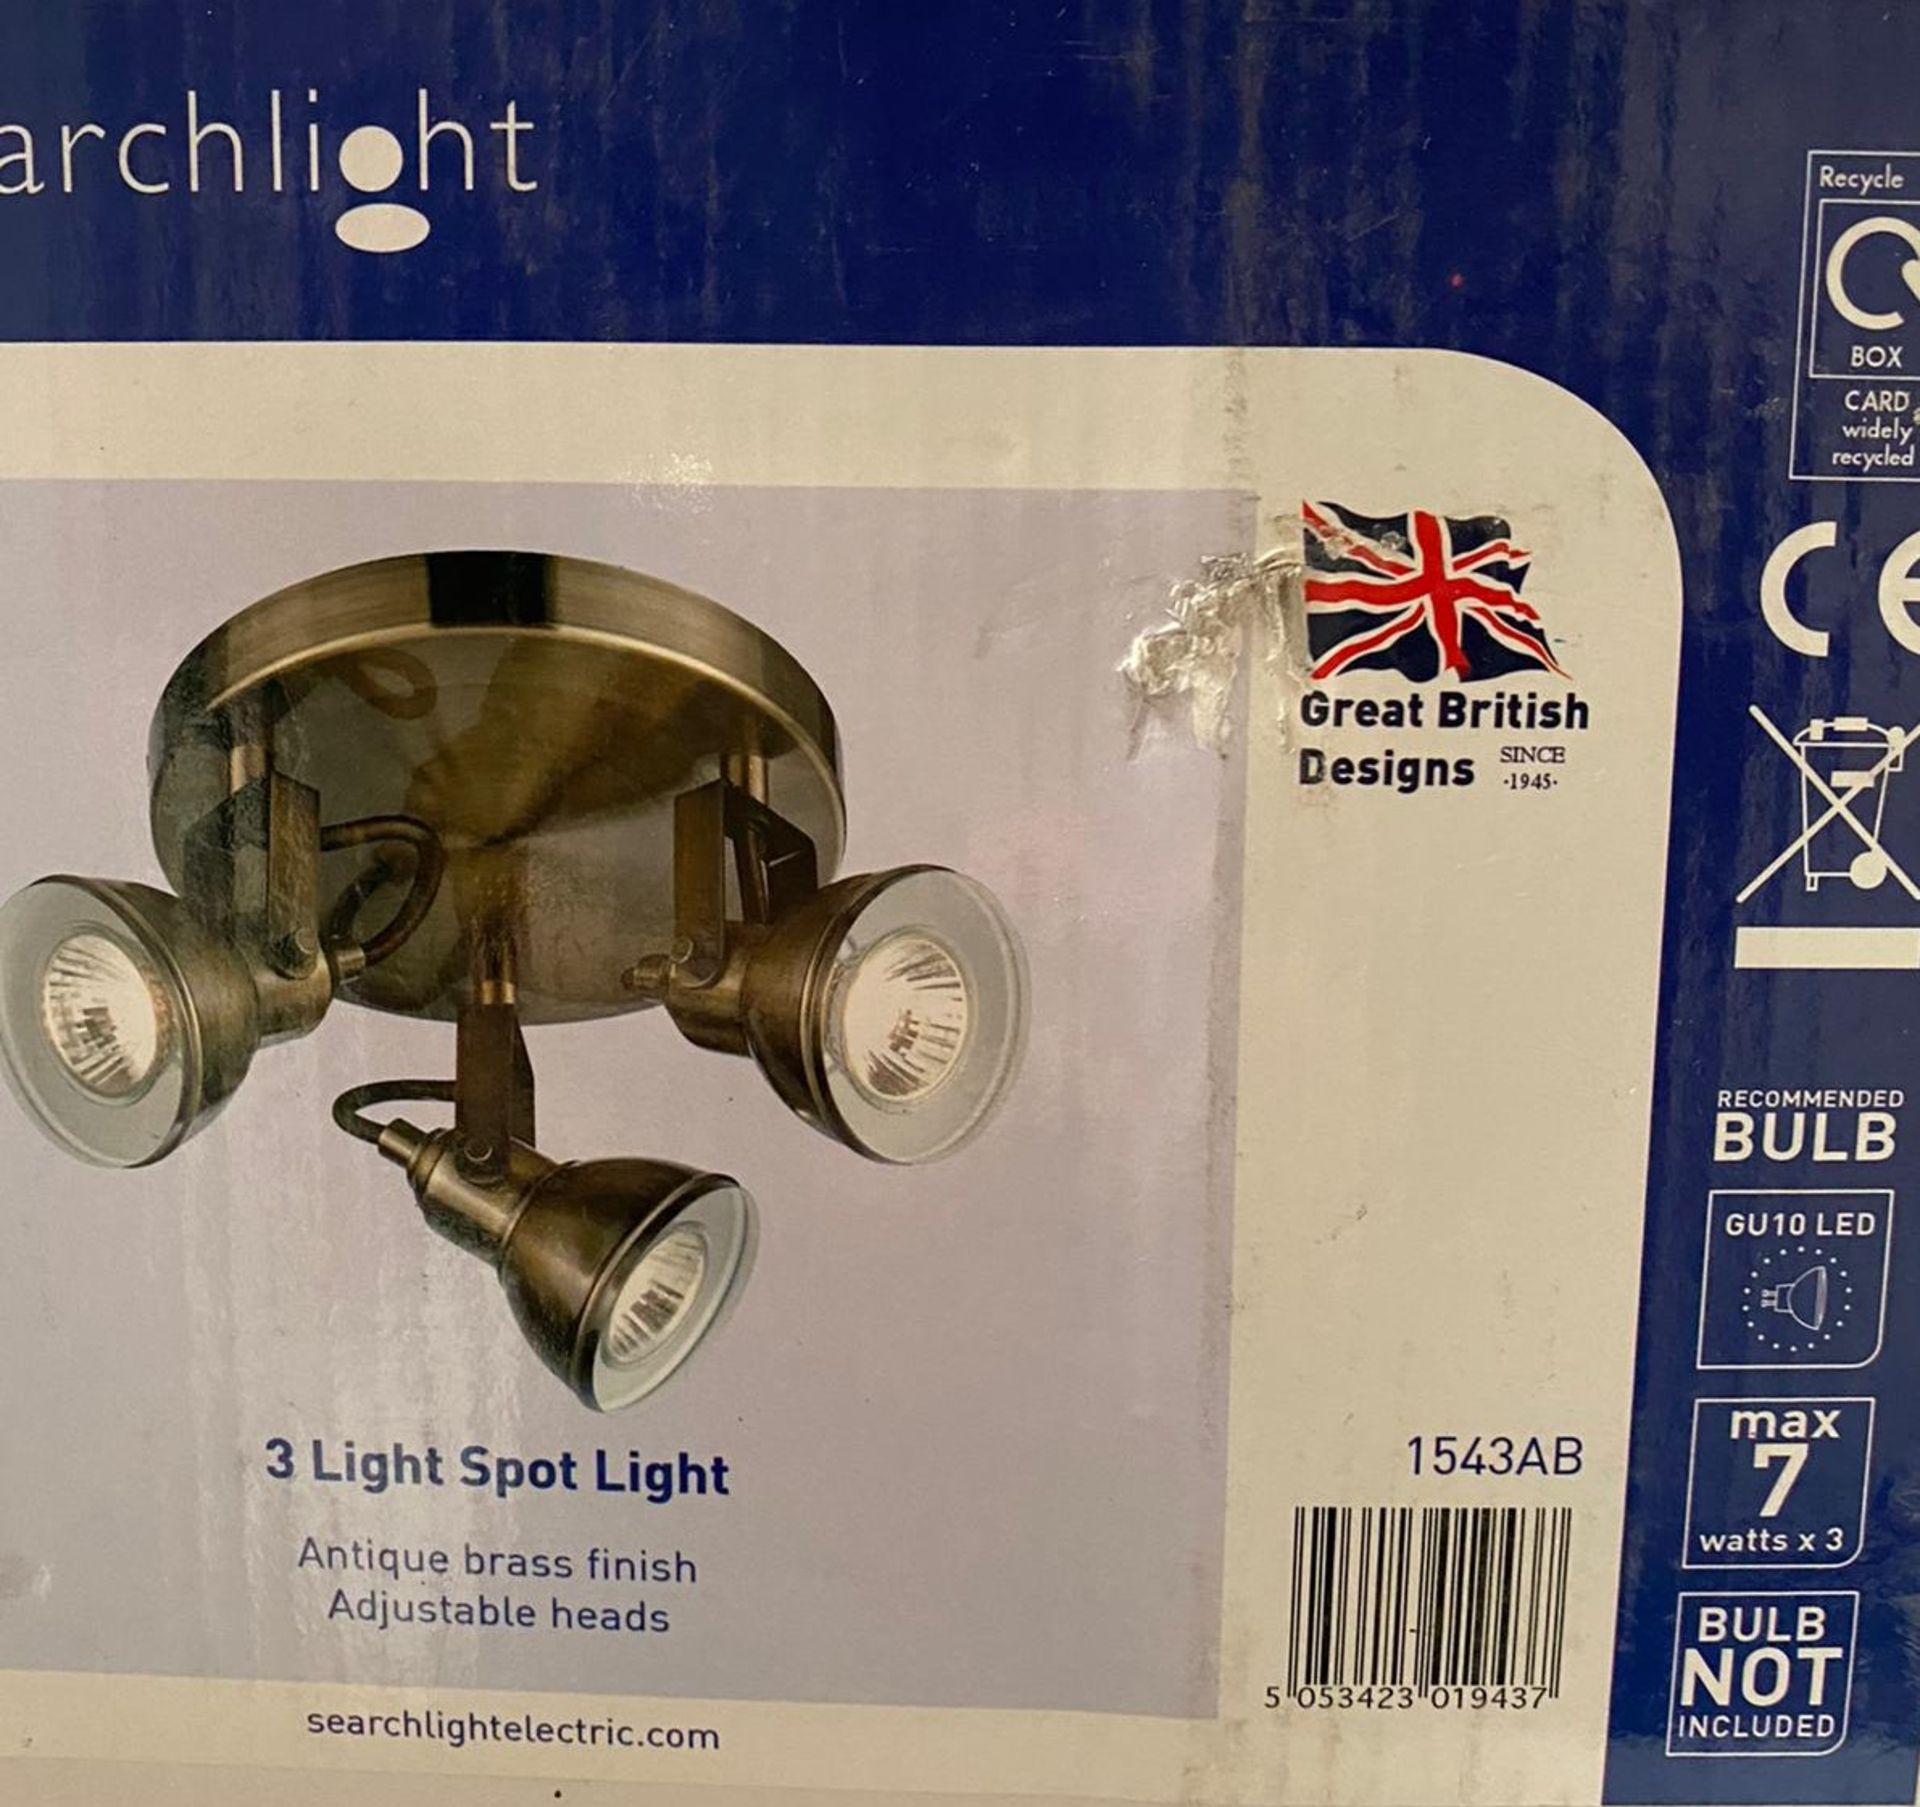 1 x Searchlight 3 Light Spot Light in Antique Brass - Ref: 1543AB - New and Boxed - RRP: £70